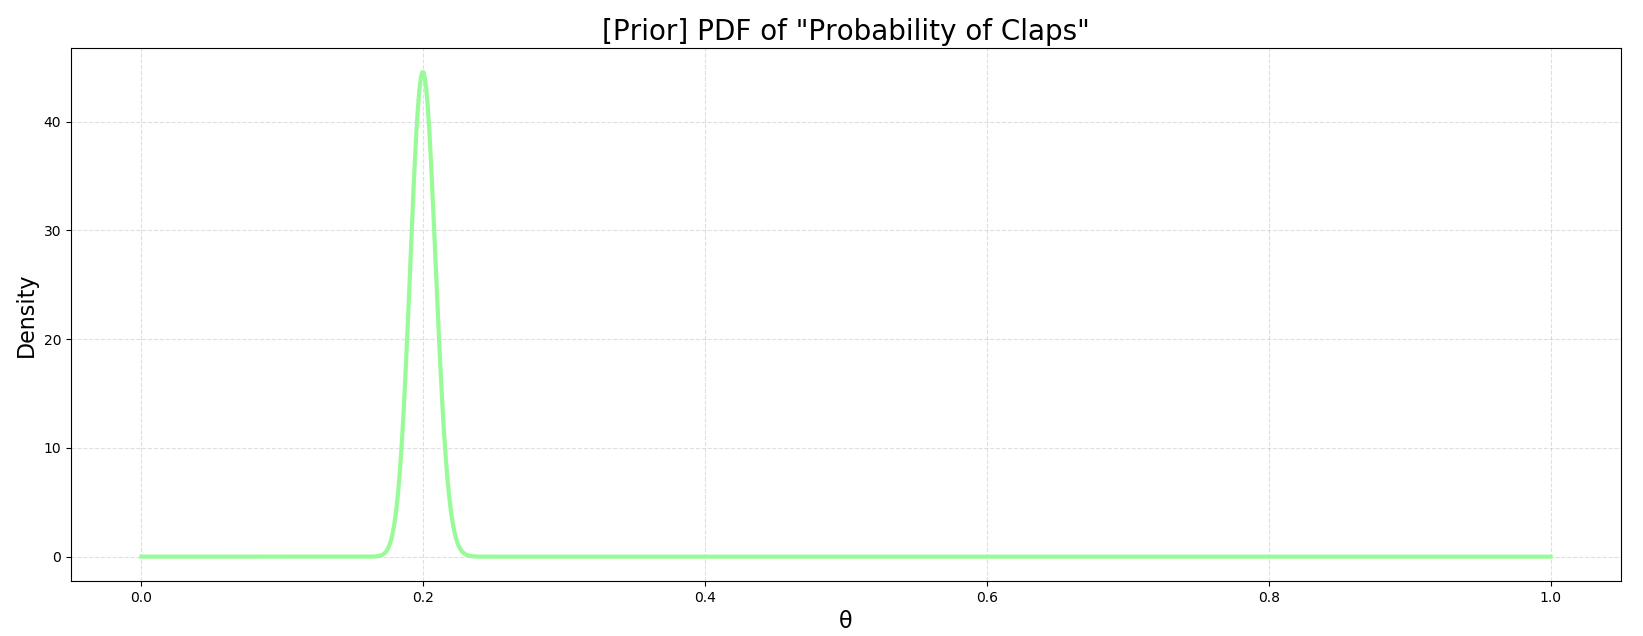 PDF of "Probability of Claps"